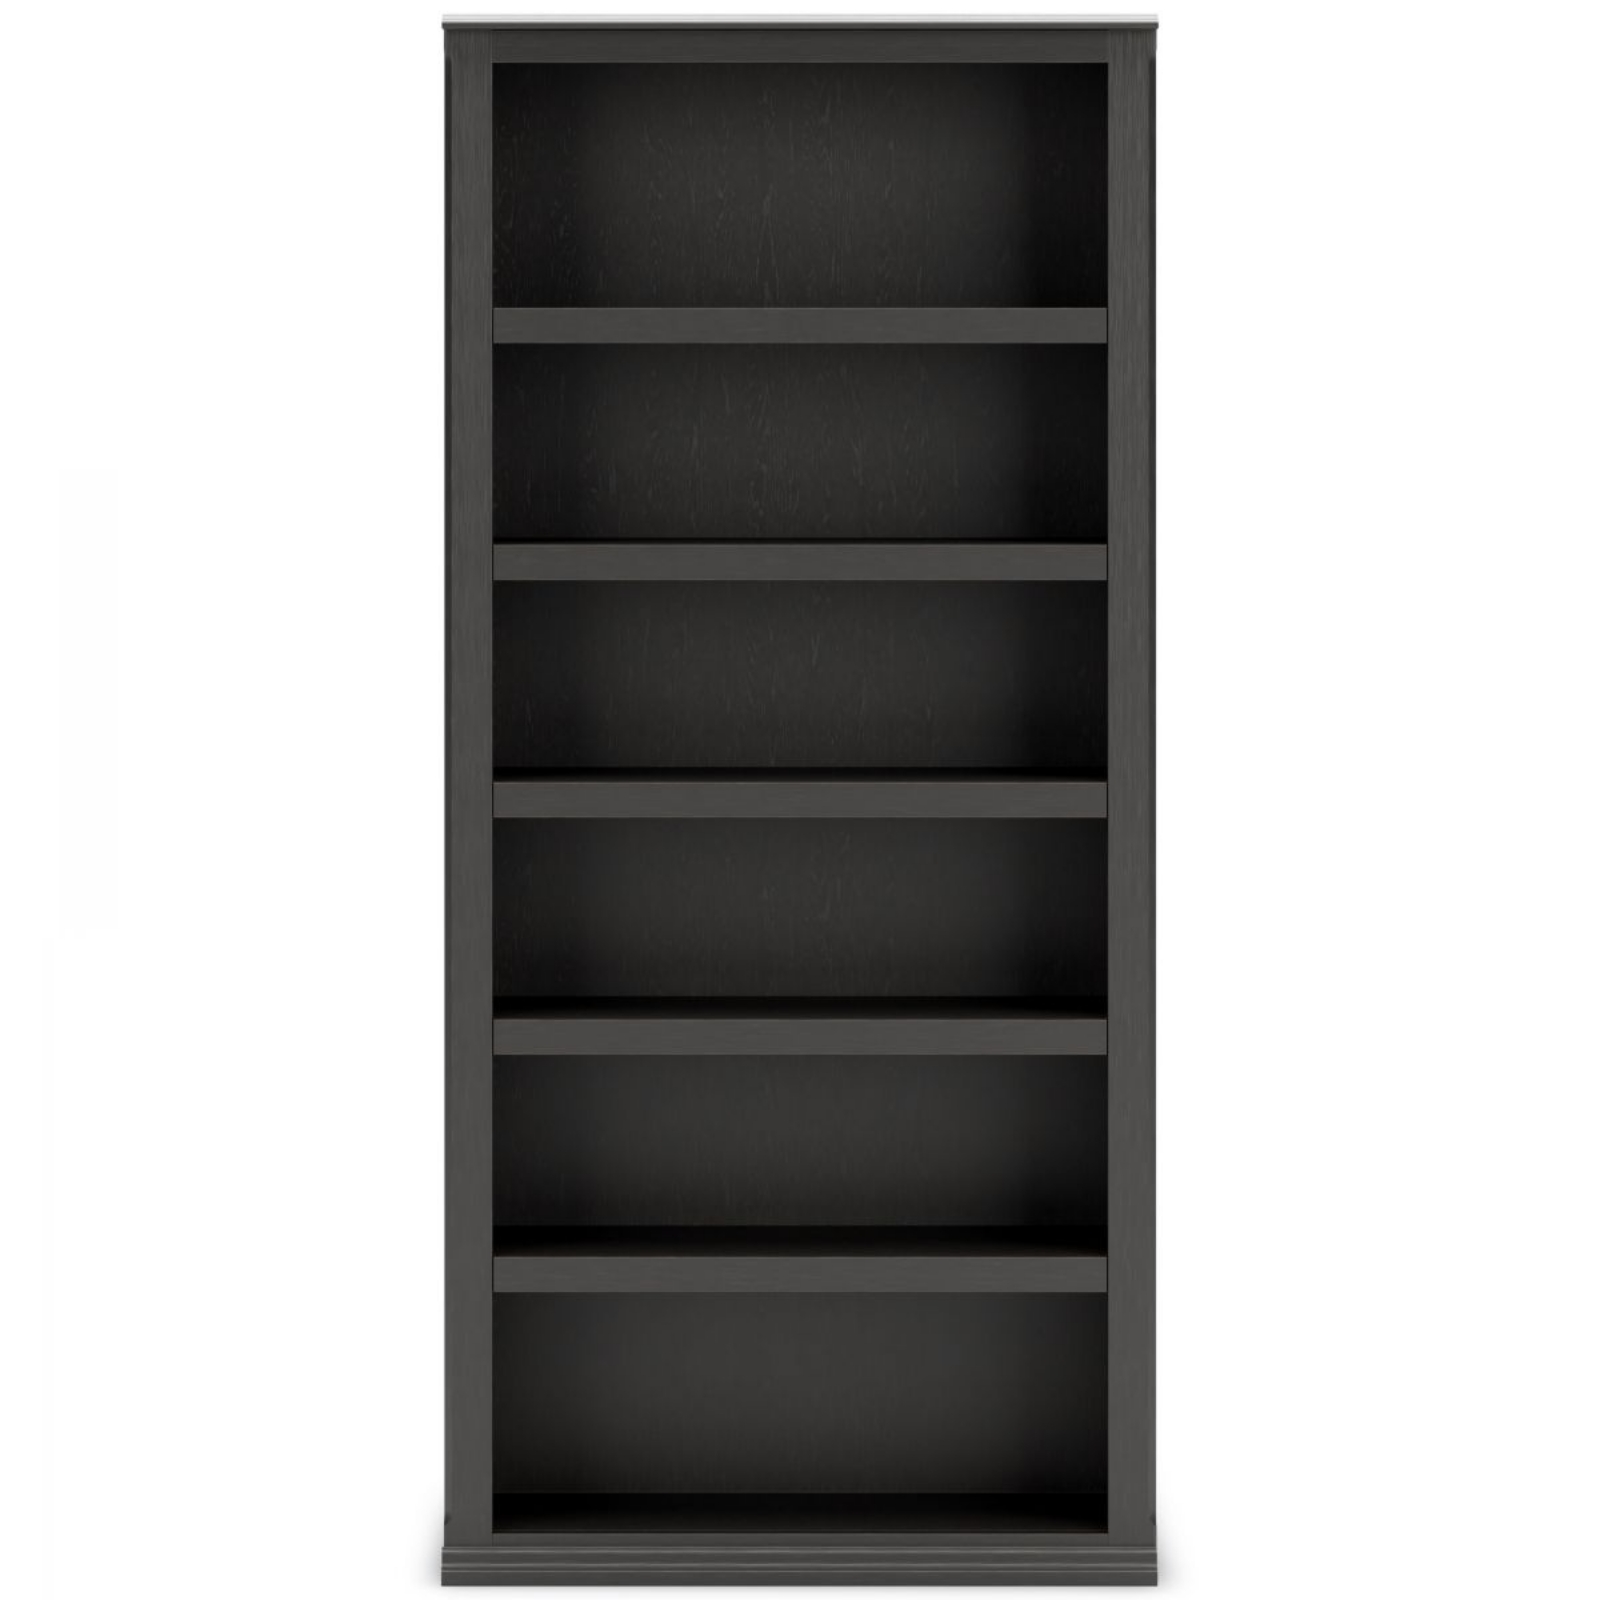 Picture of Beckincreek Bookcase